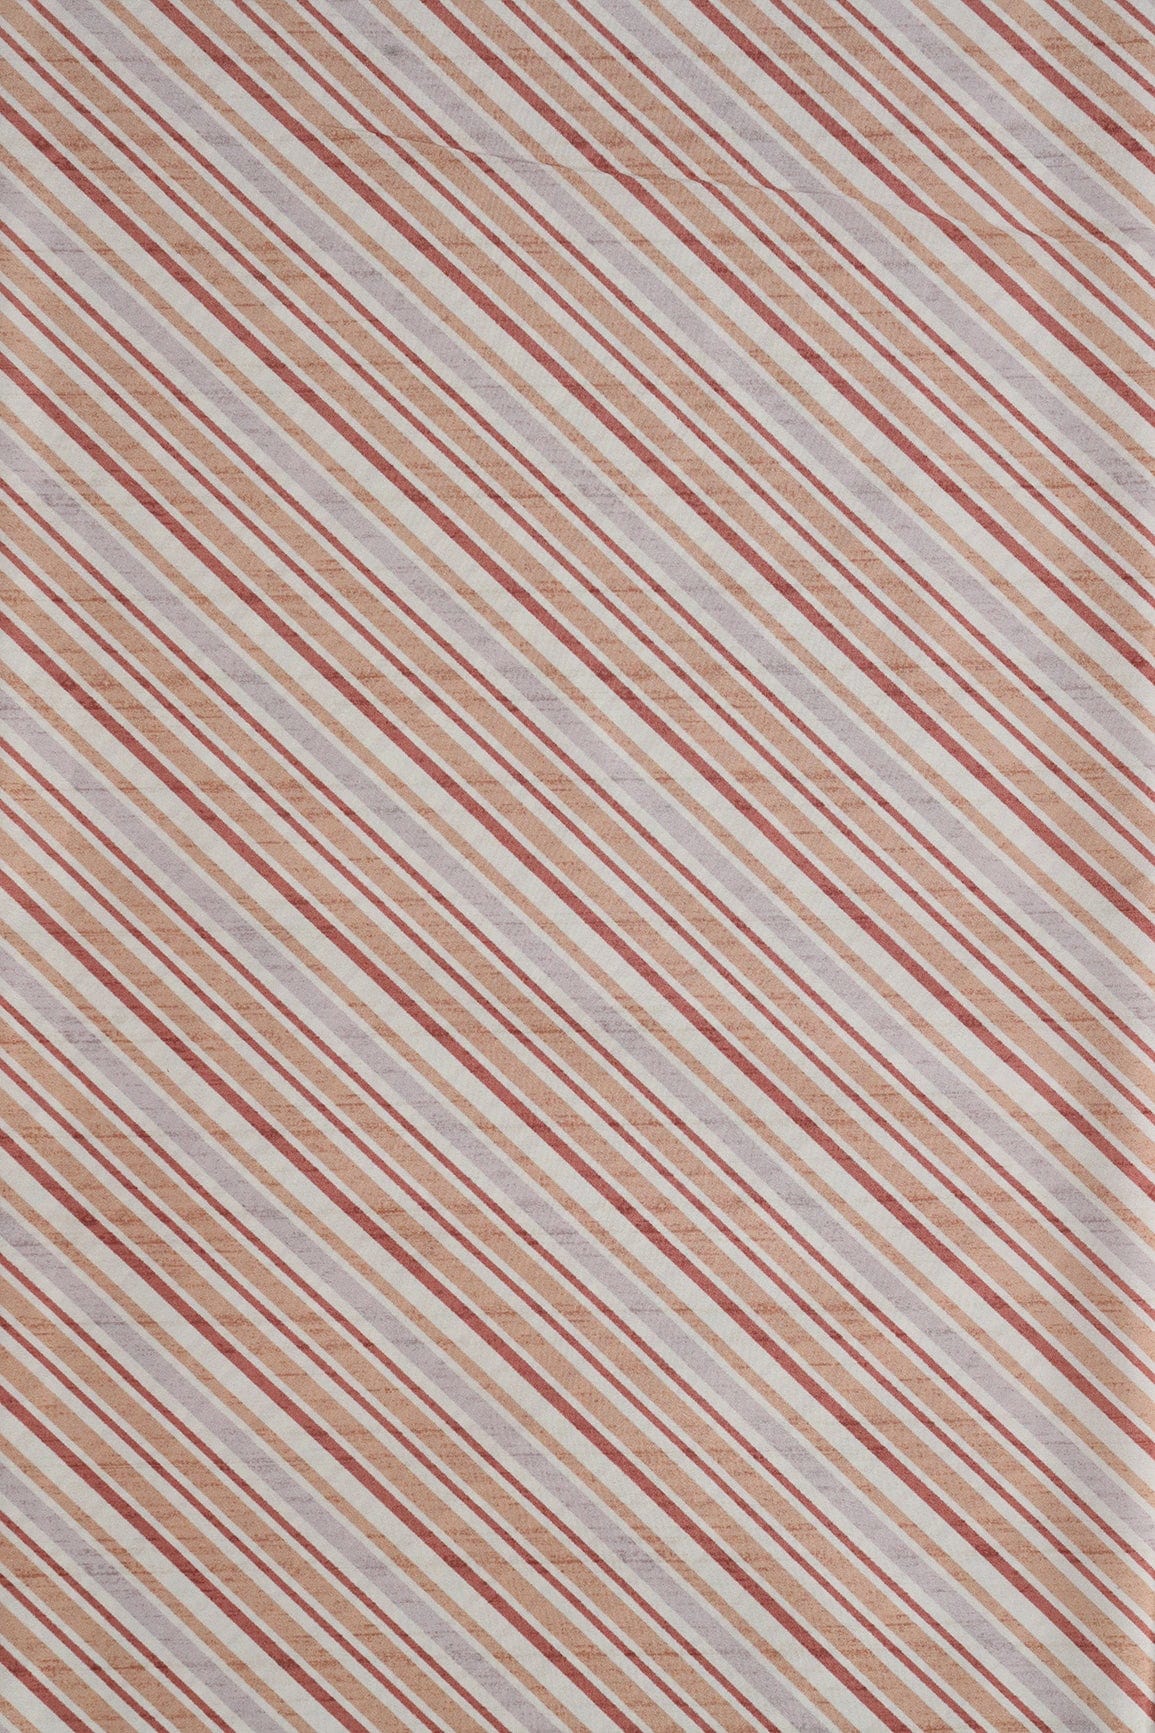 doeraa Prints Brown And Beige Stripes Pattern Digital Print On Cream French Crepe Fabric